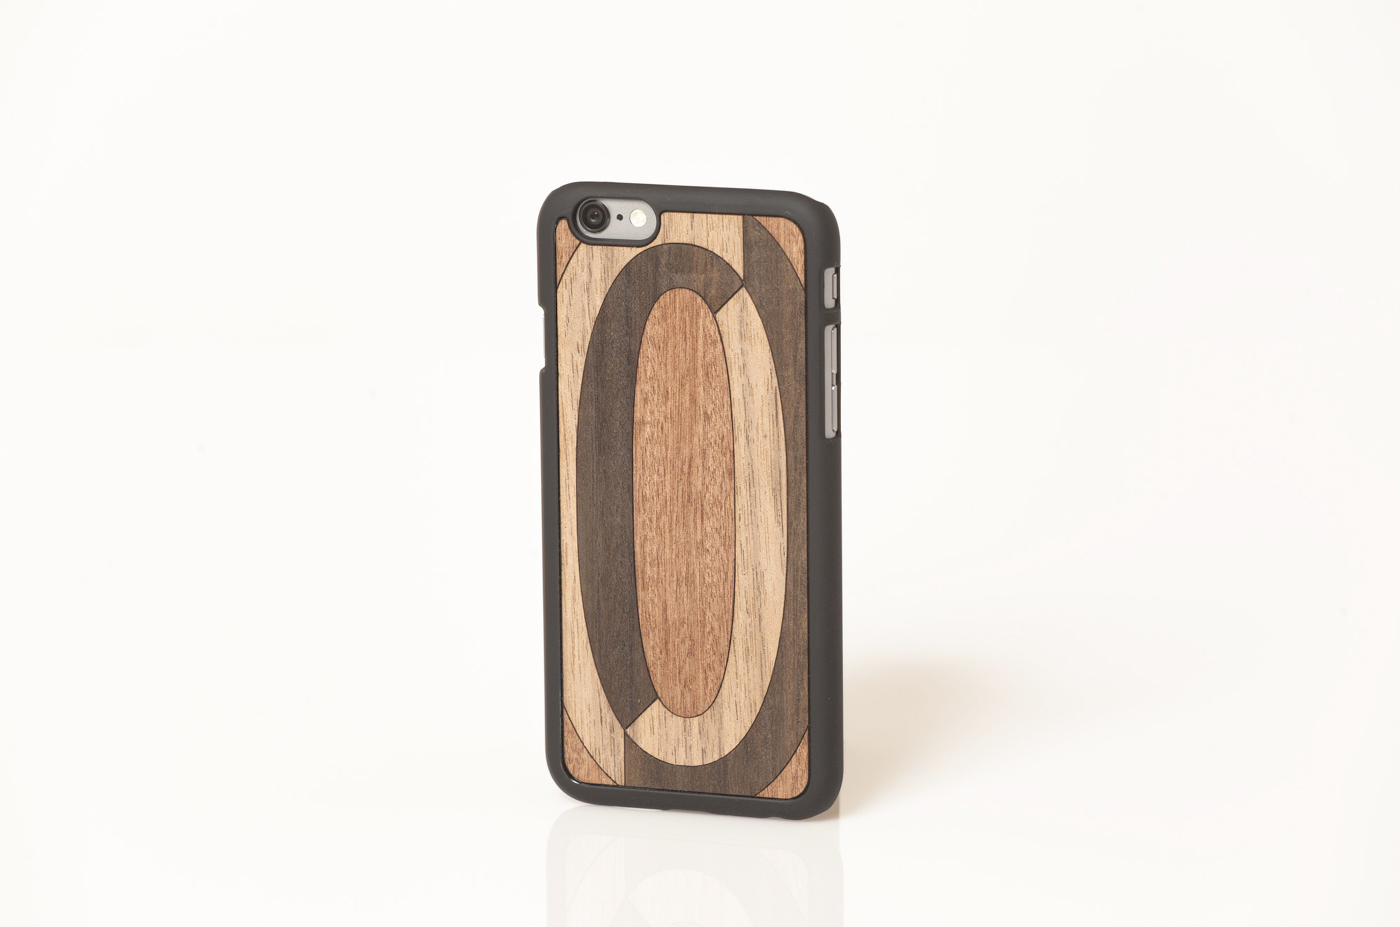 Adobe Portfolio cover wood wooden iphone wood'd accessories